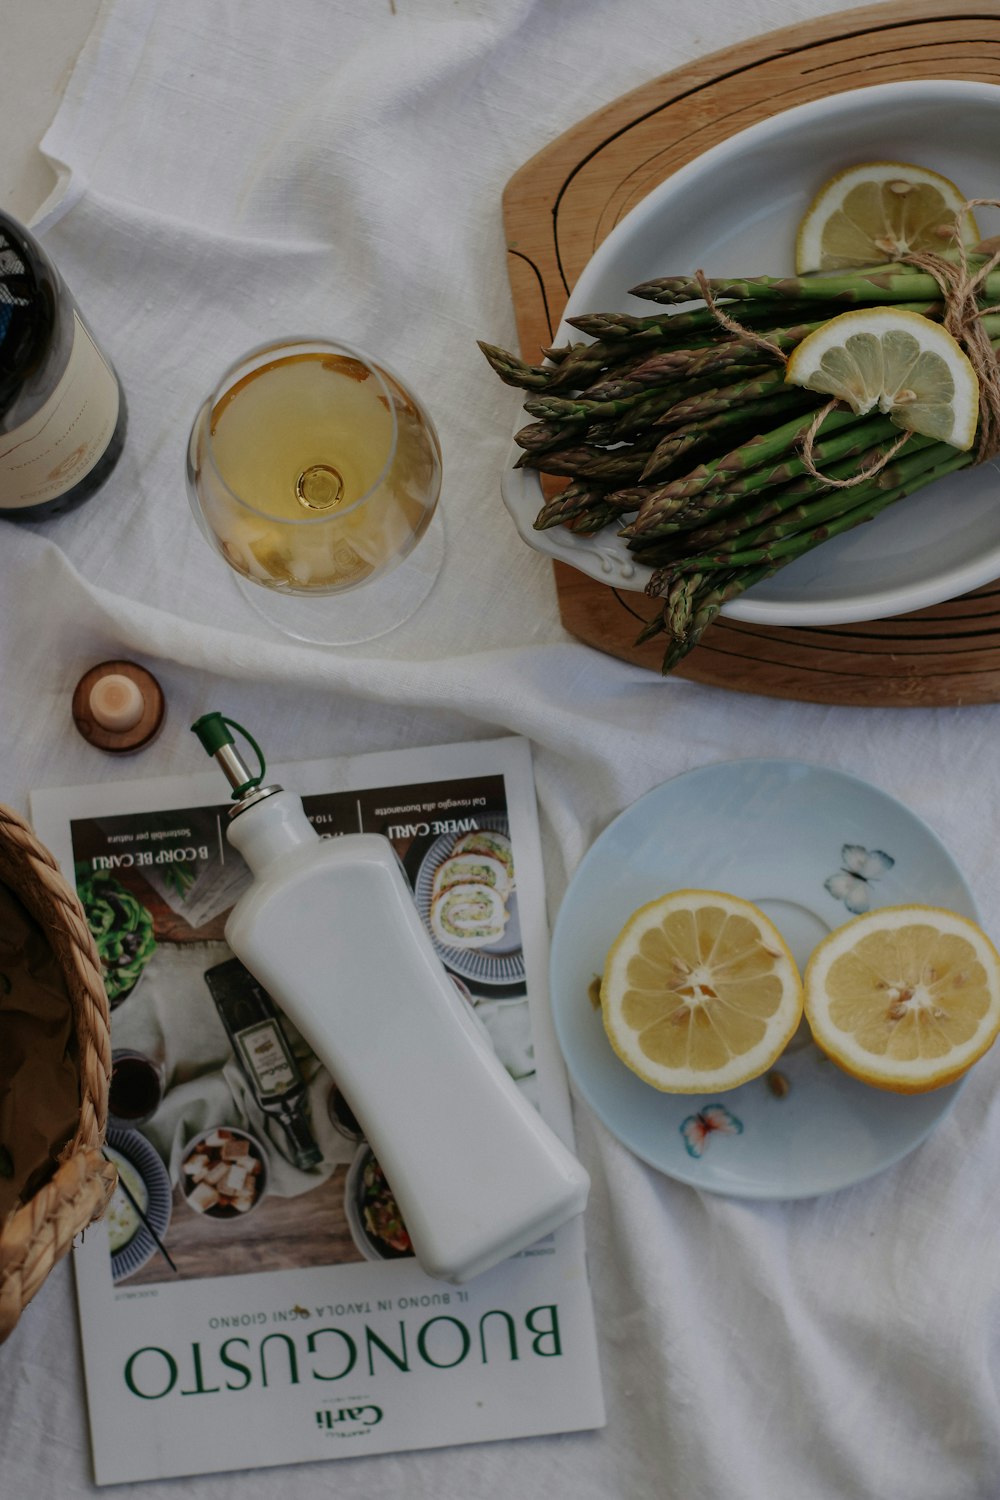 a plate of asparagus, lemons, and a bottle of wine